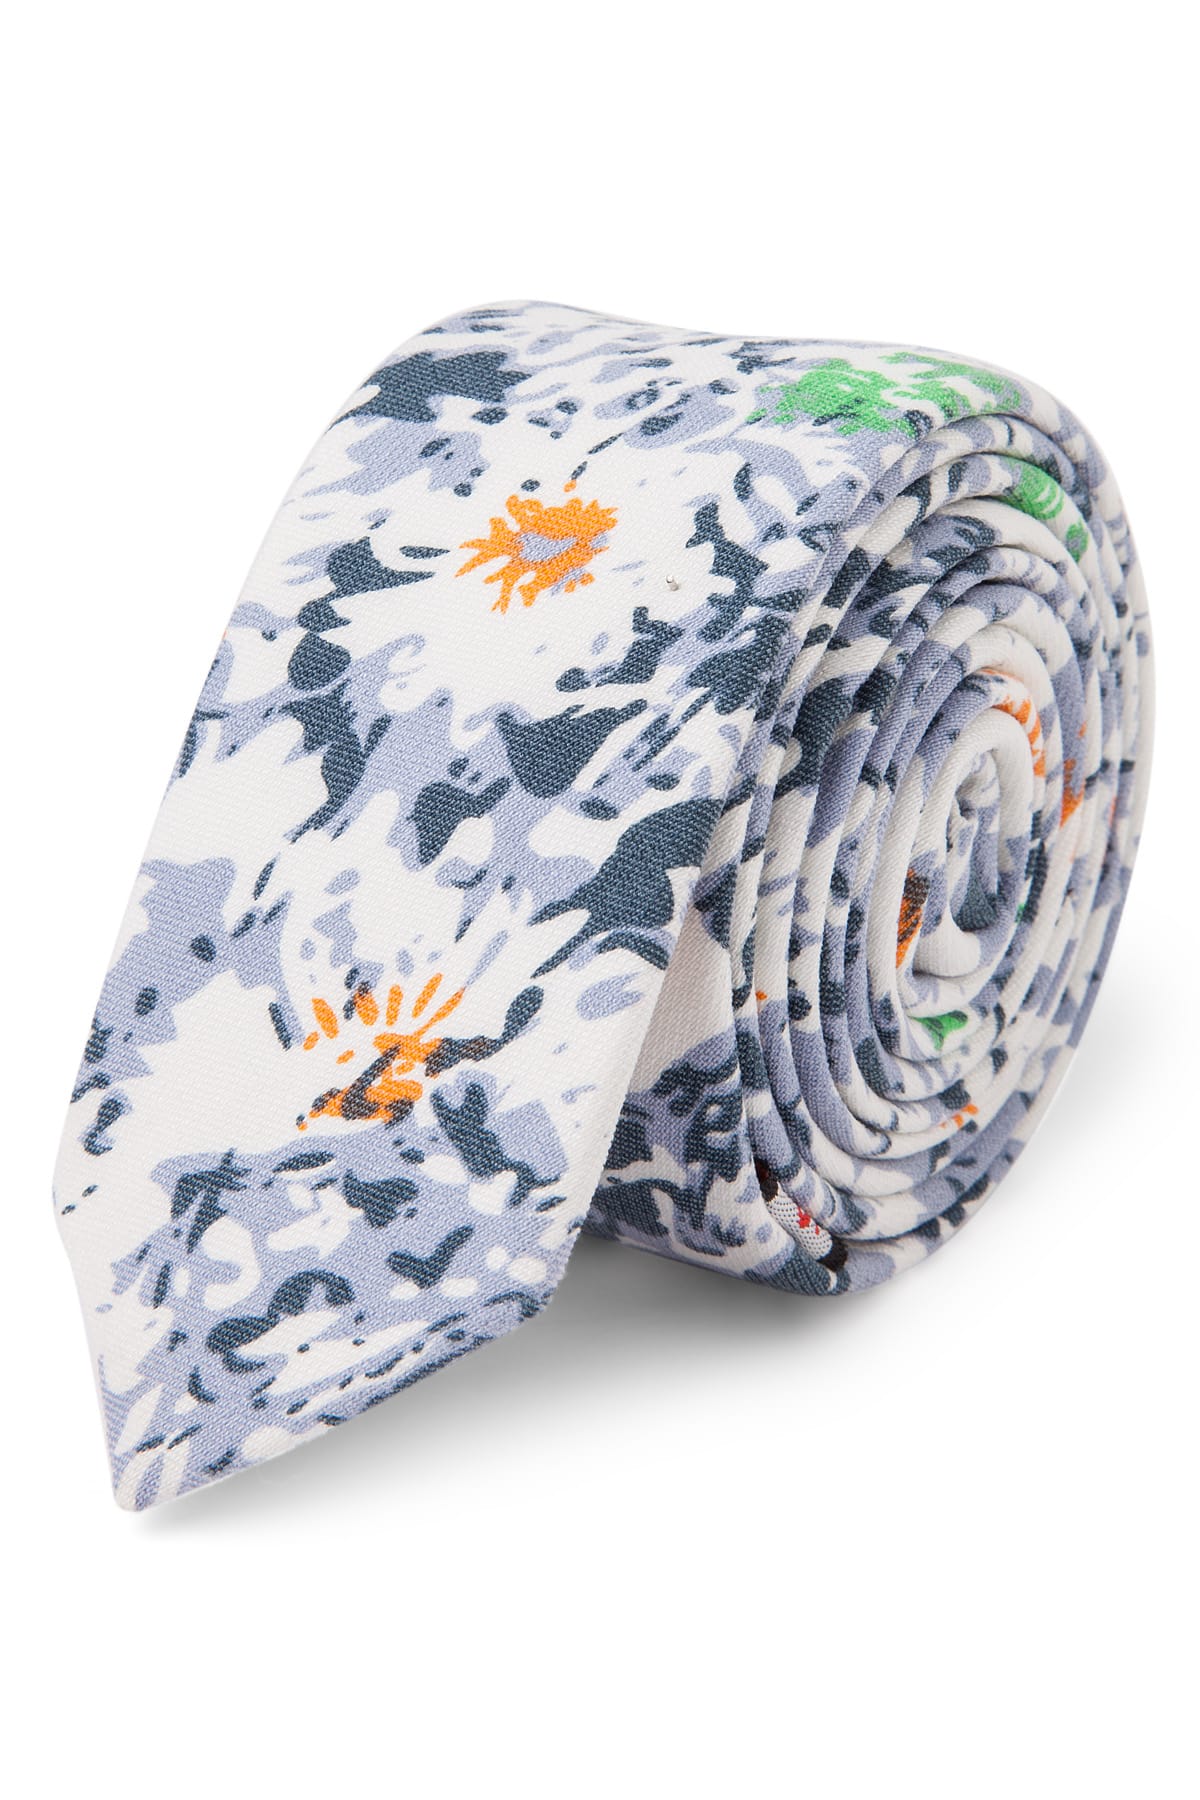 Skinny Tie Madness Blue Floral Coming Correct Tie